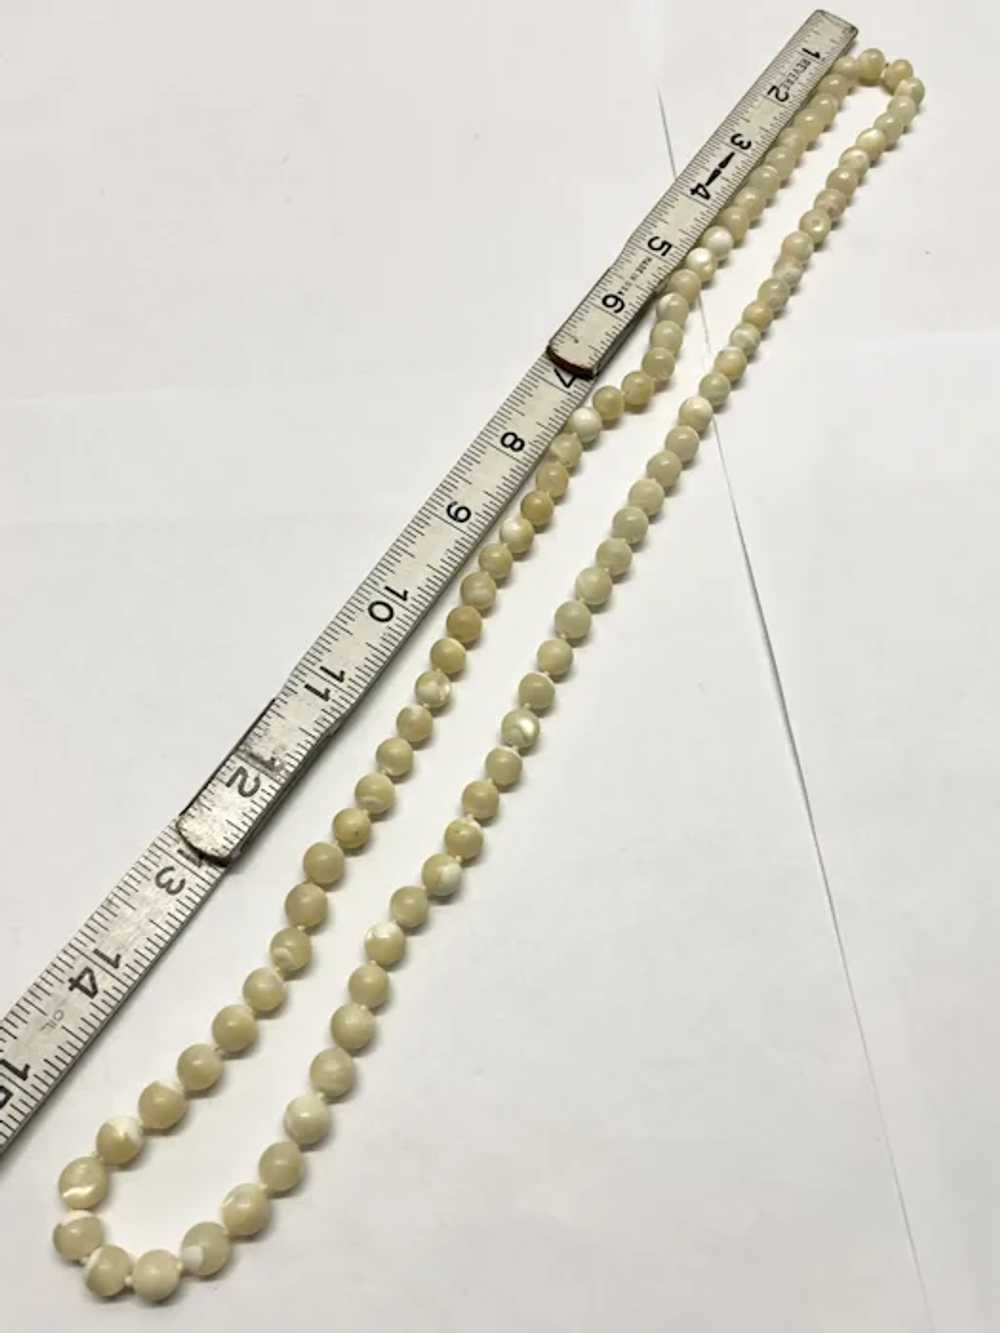 Vintage glass mother of pearl beaded necklace - image 4